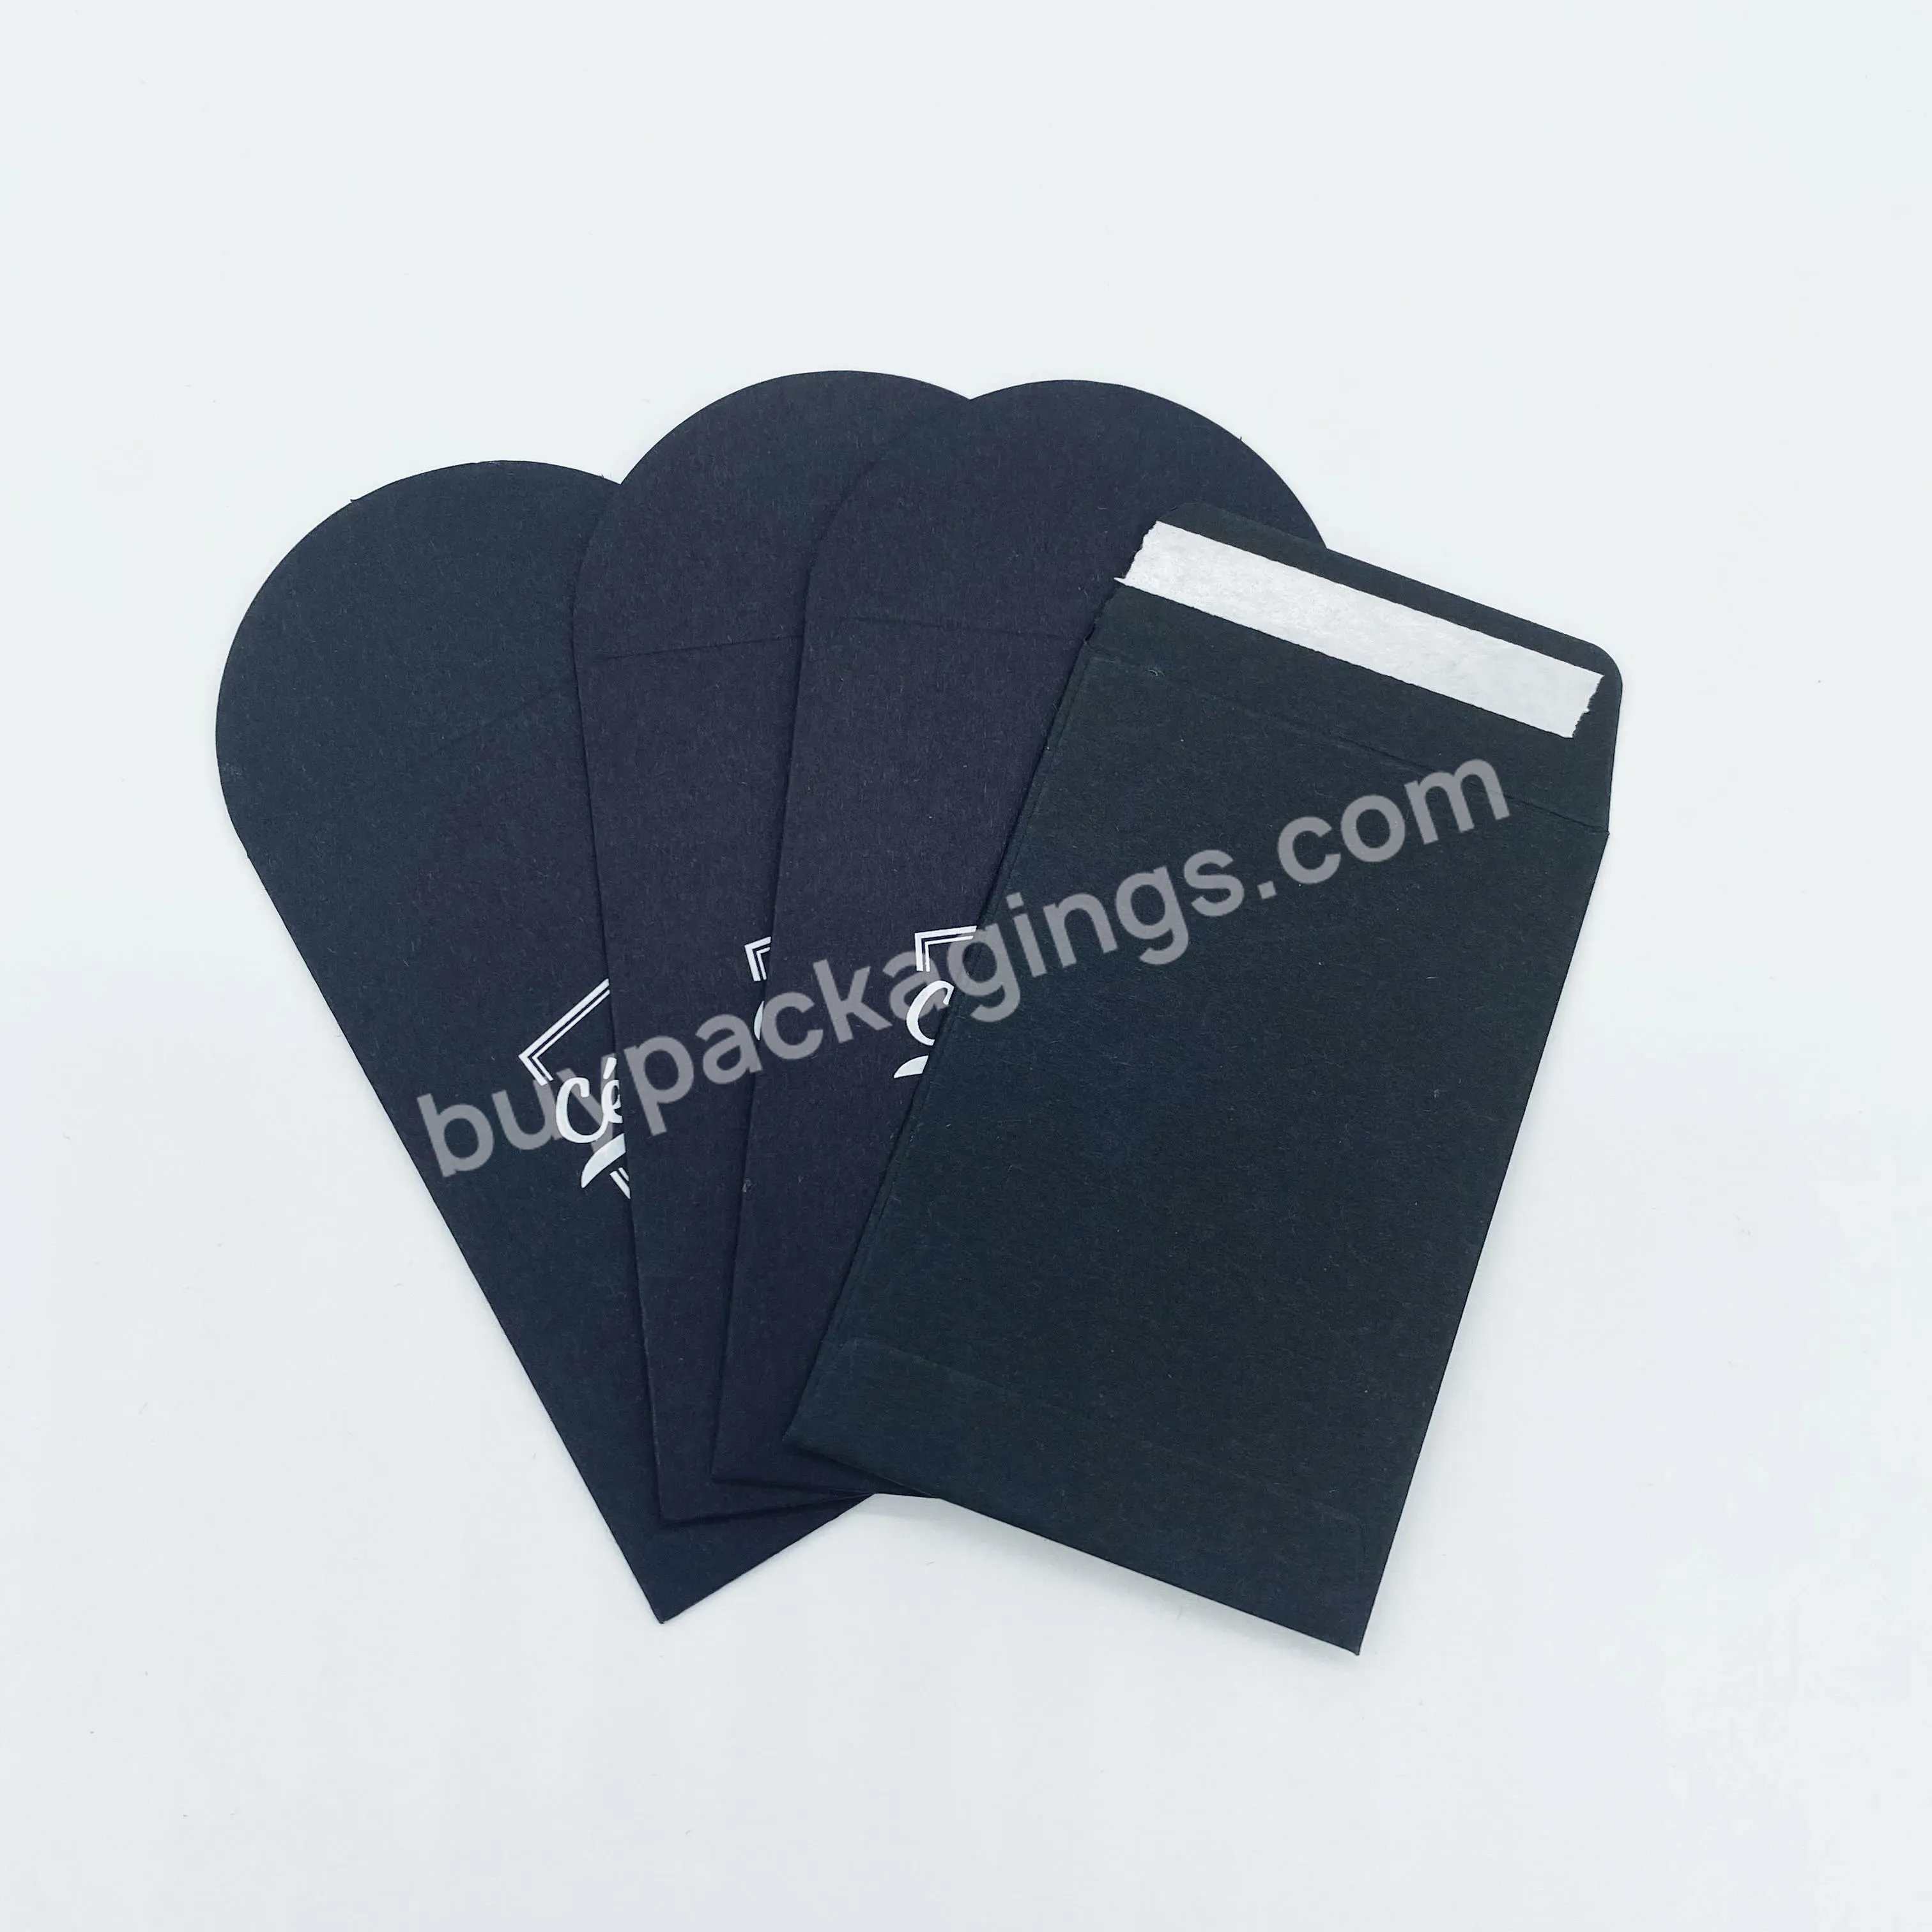 Recycled Custom Uv Foil Printed Luxury Small Gift Card Black Coin Paper Envelope Packaging Money Gift Envelopes - Buy Black Paper Envelope,Small Gift Envelopes,Paper Envelope Custom.